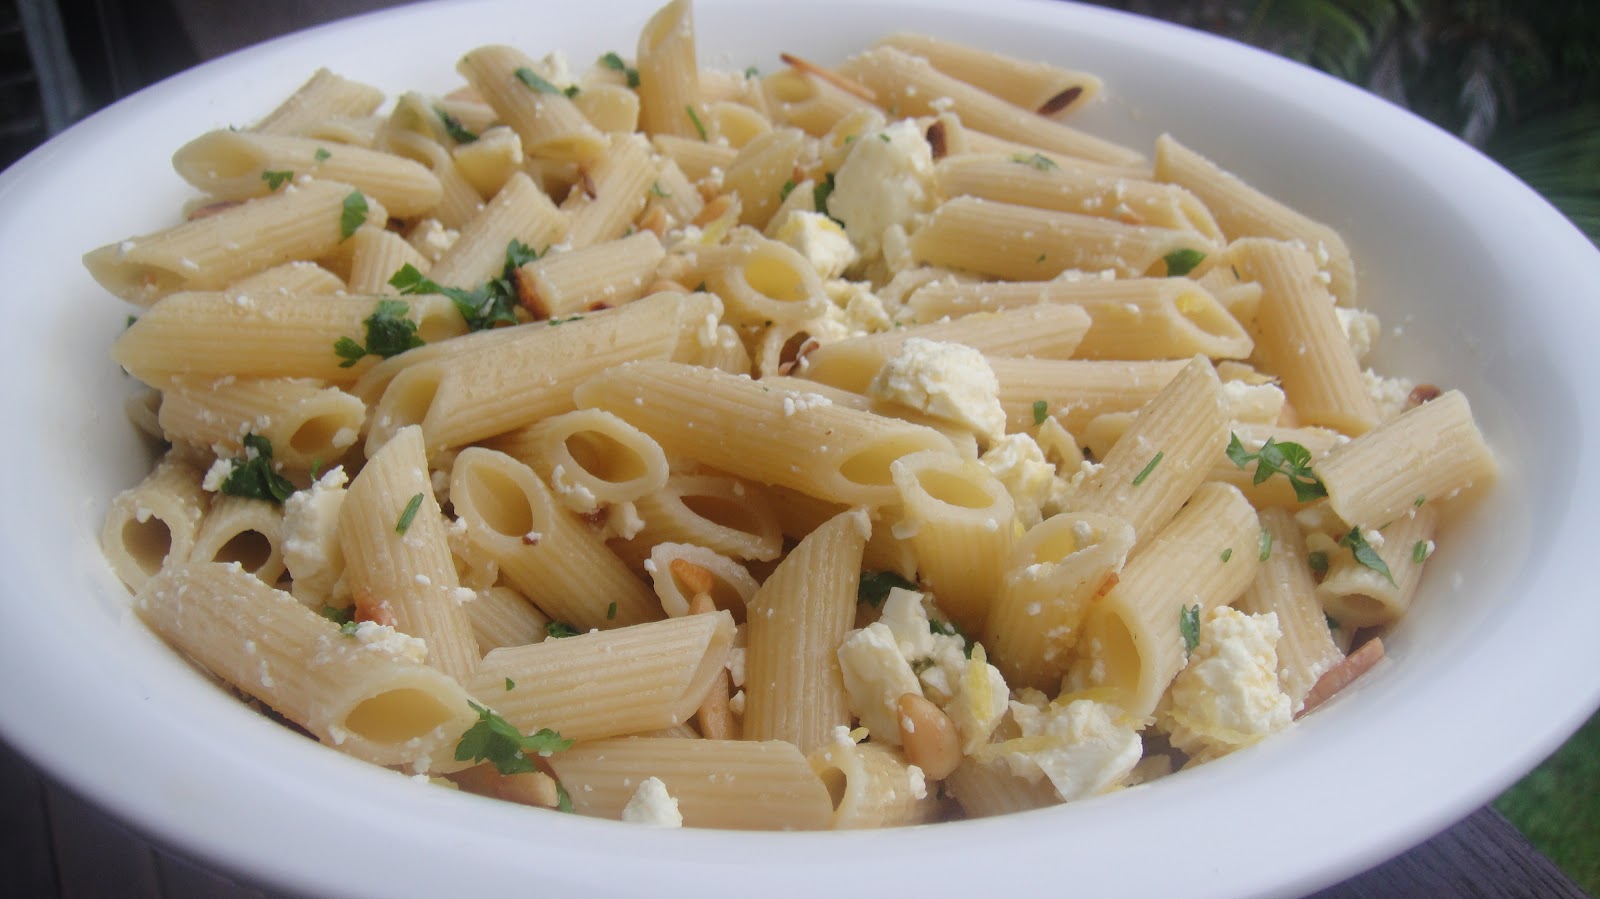 Mums in the Kitchen: Penne with Feta and Lemon